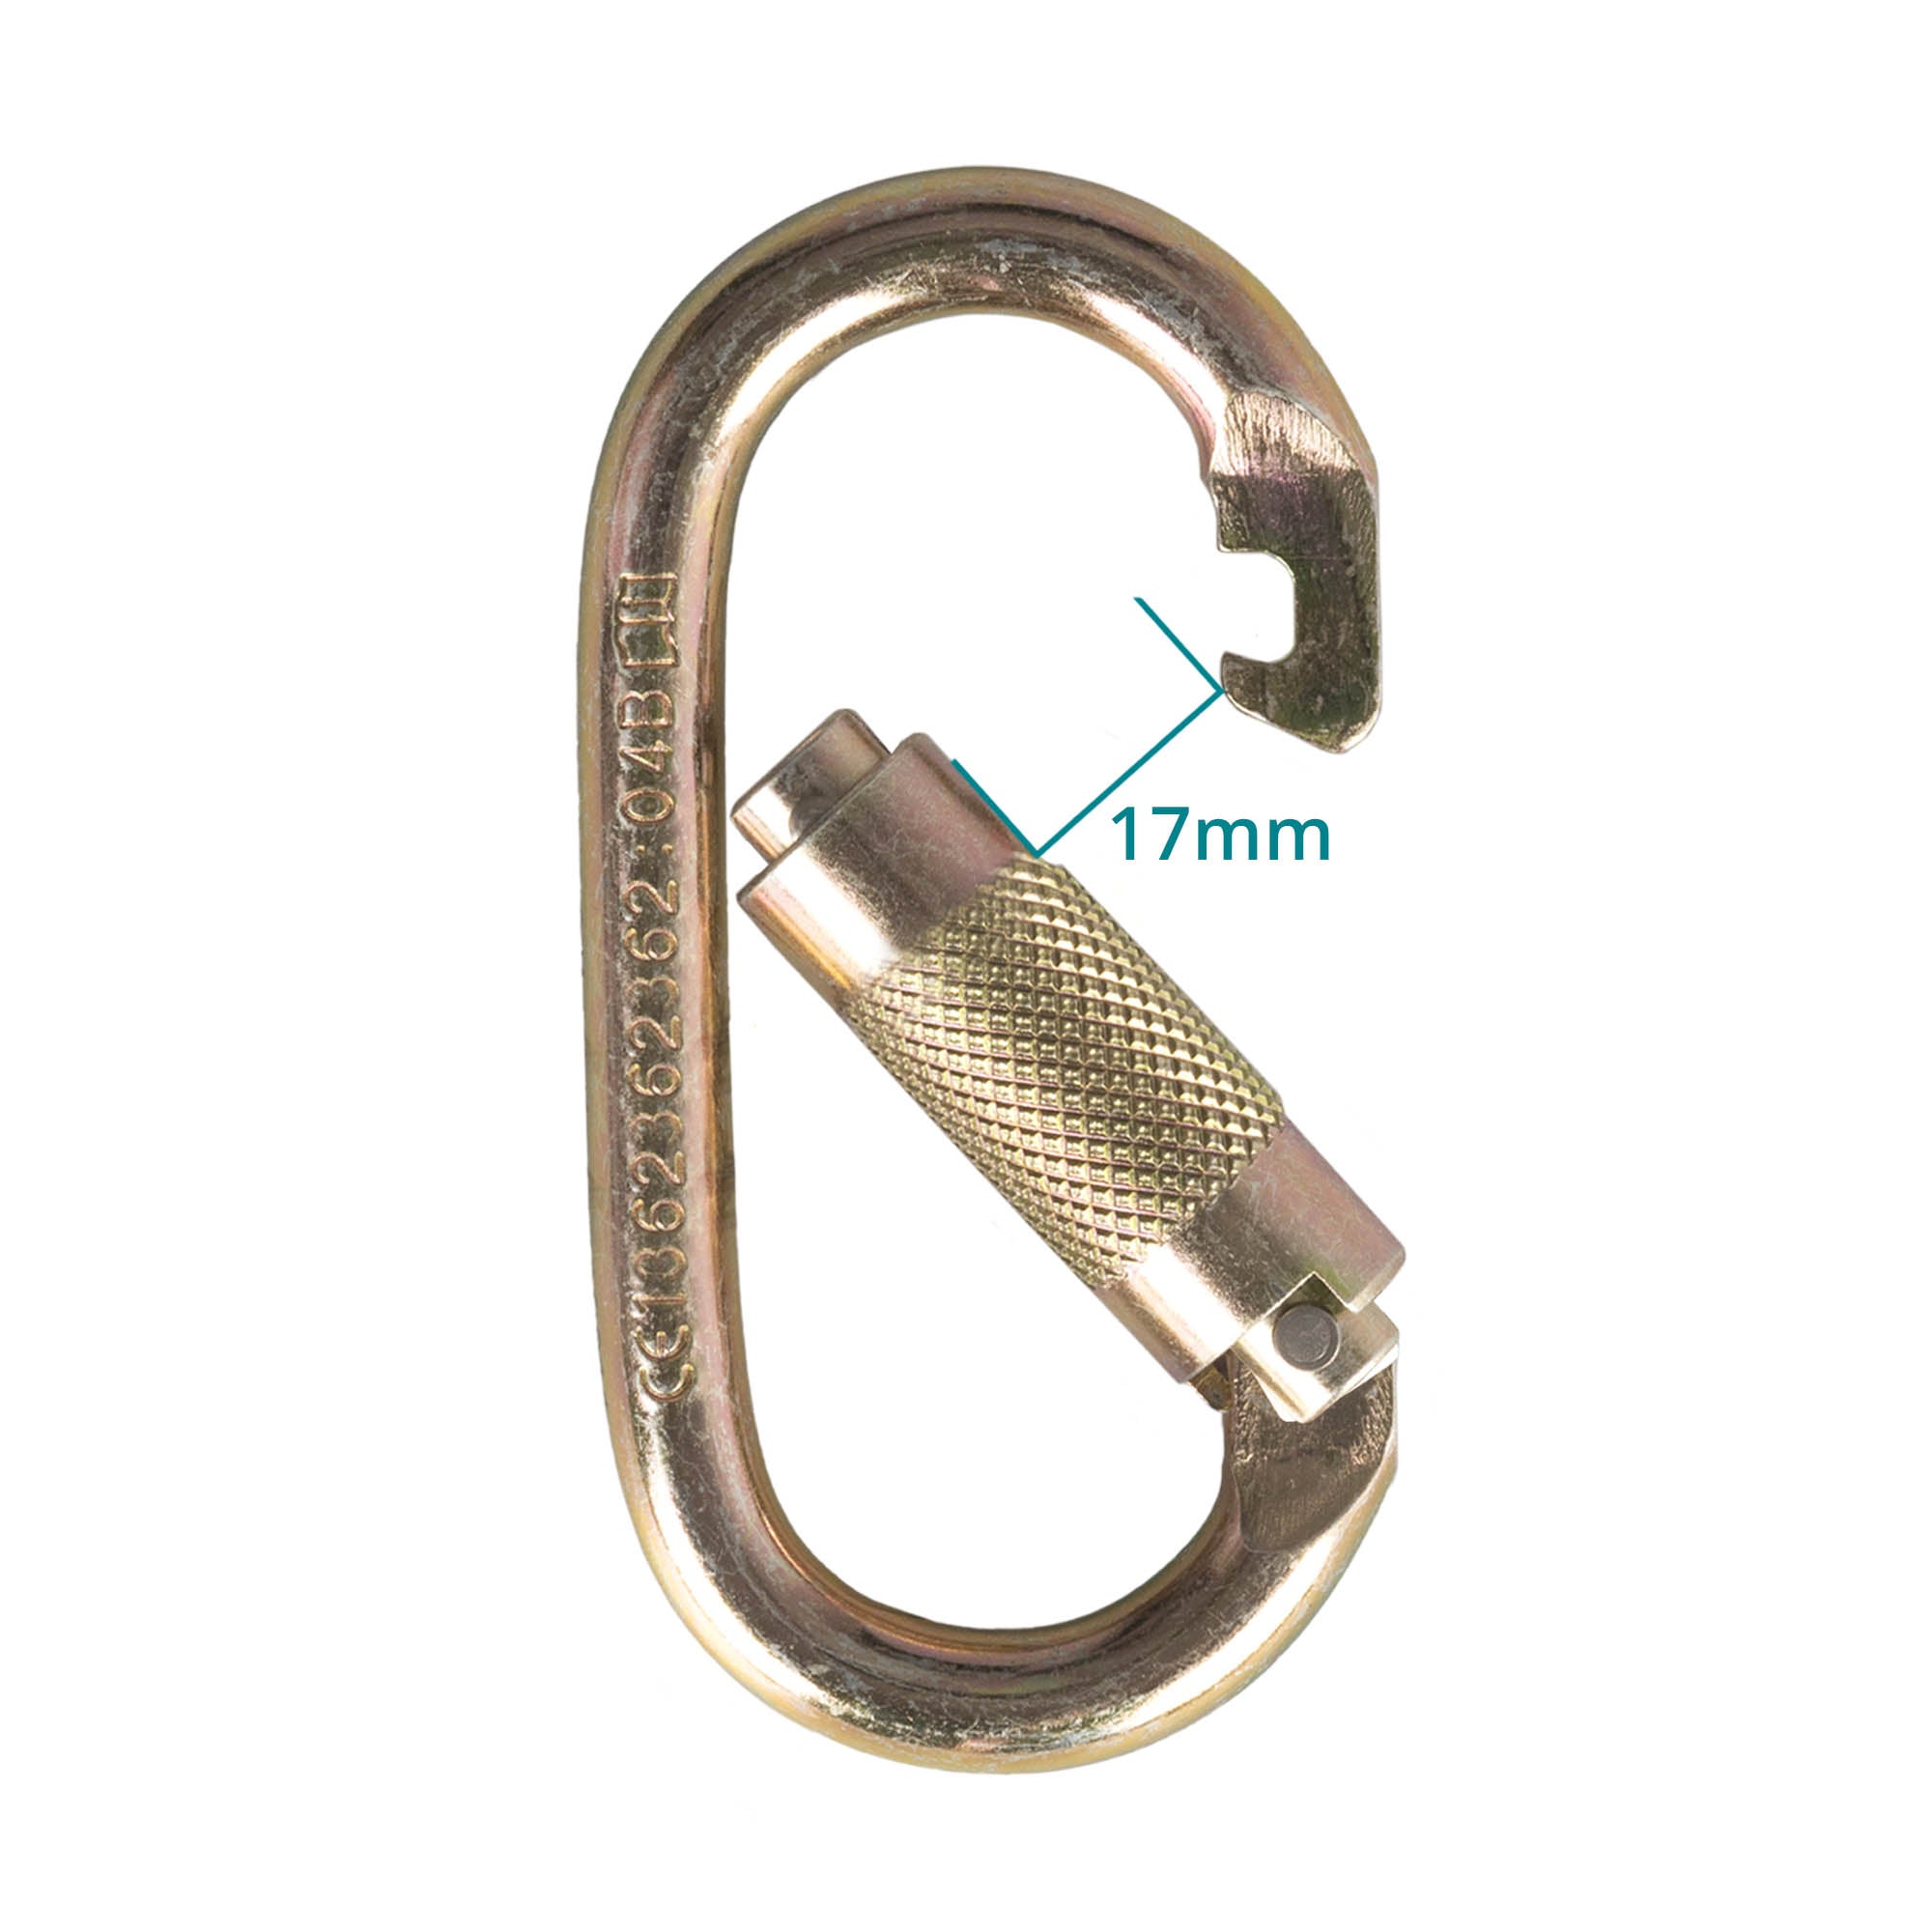 Prodigy double action carabiner measurement